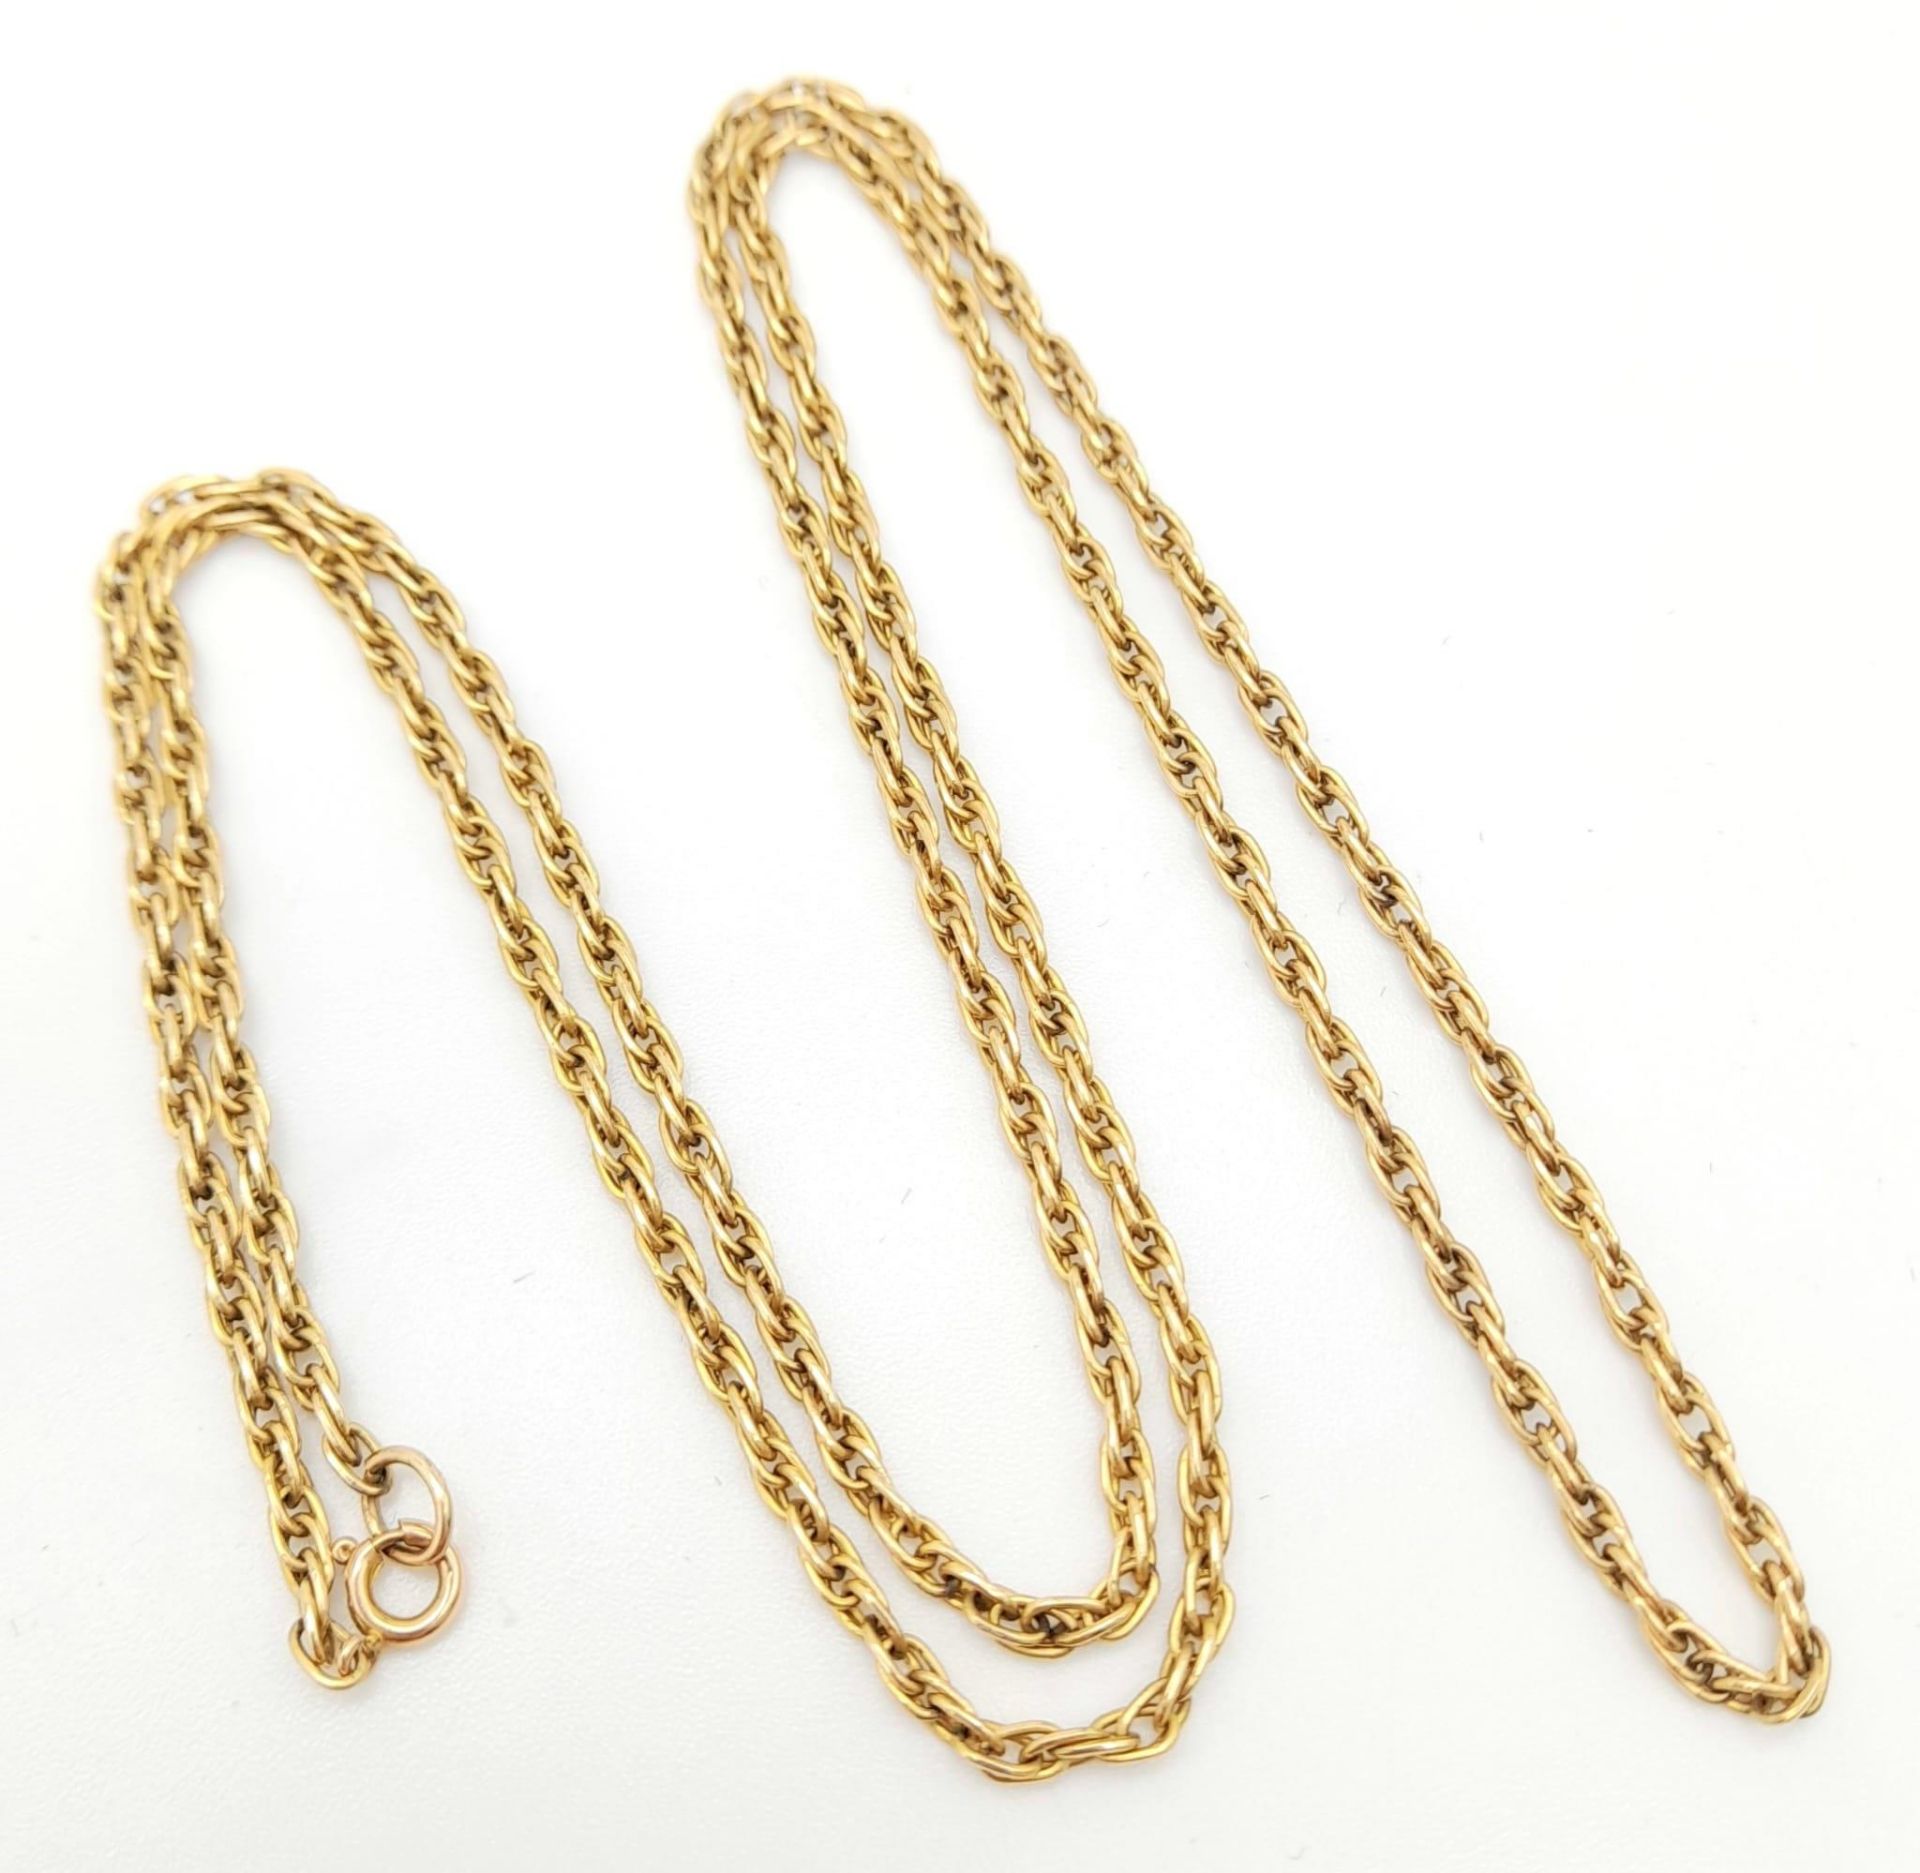 A Vintage 9K Yellow Gold Oval Link Chain/Necklace. 60cm length. 8.7g weight. - Image 3 of 5